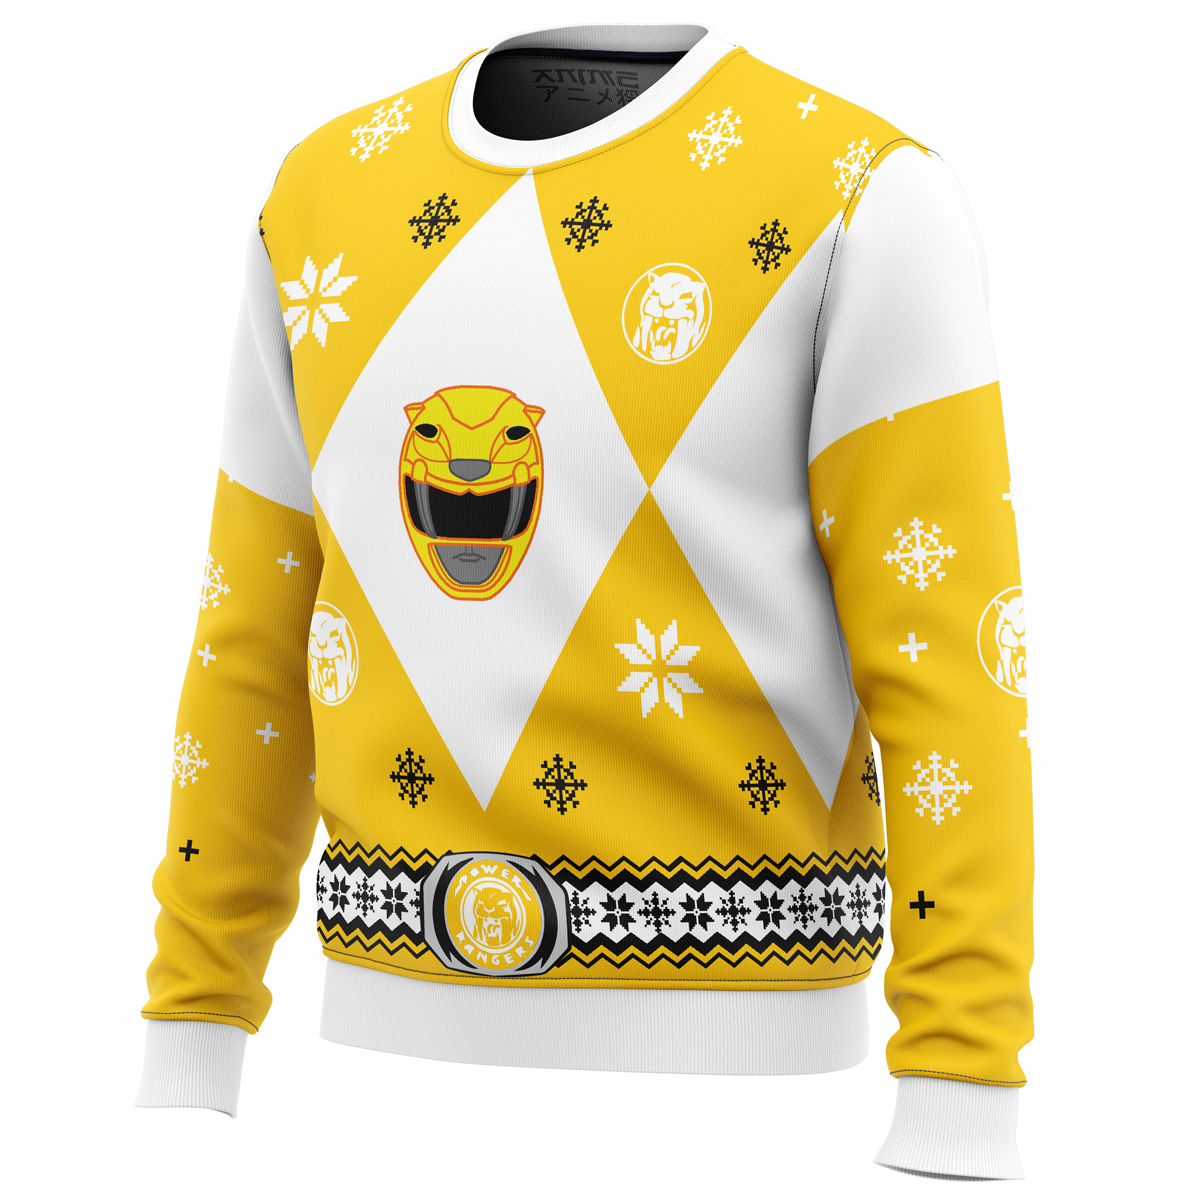 Mighty Morphin Power Rangers Yellow Ugly Christmas Sweater